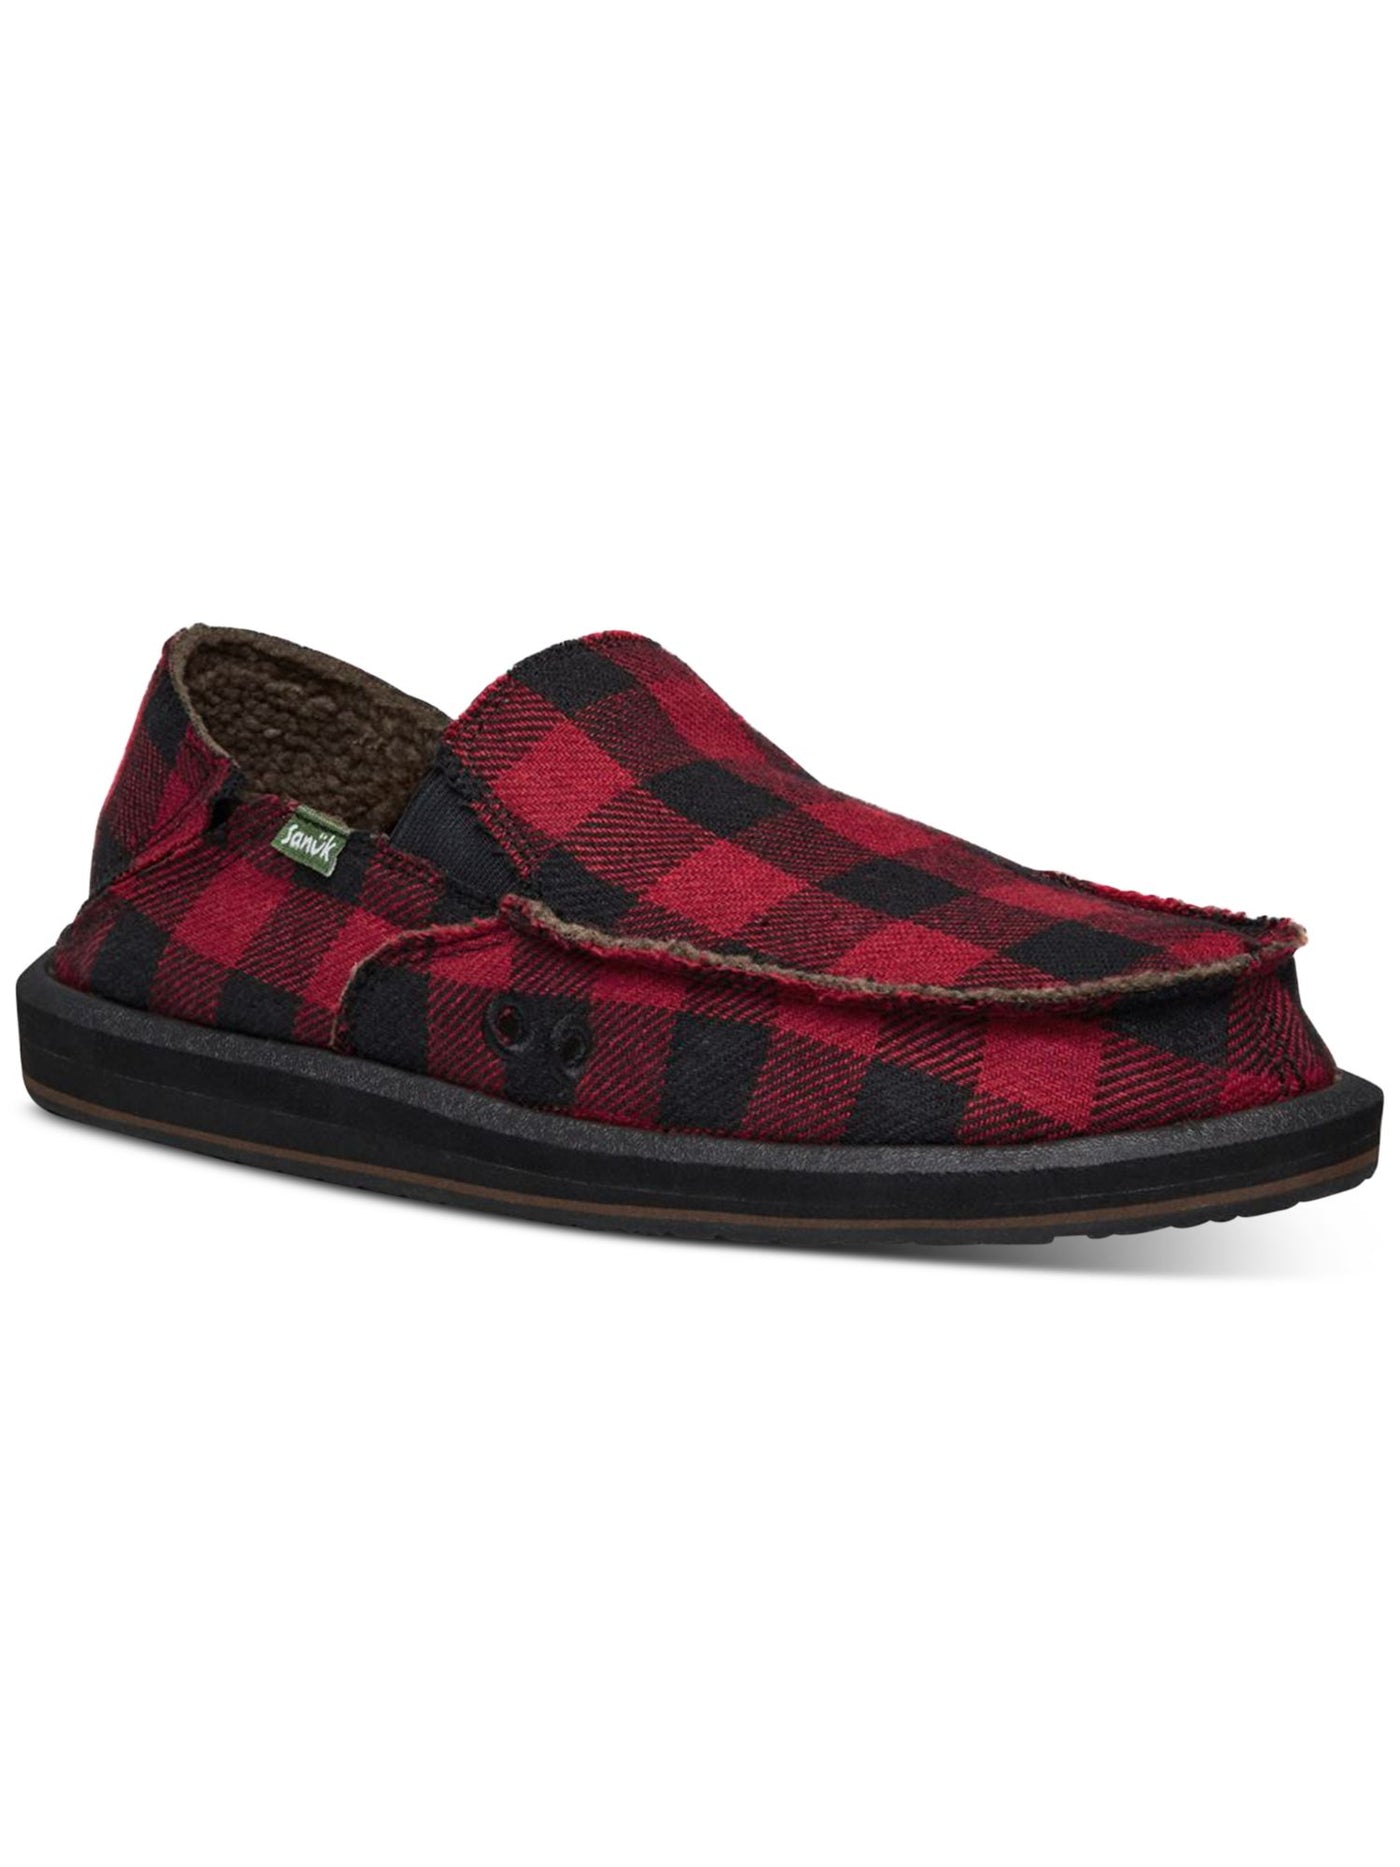 SANUK Mens Red Plaid Buffalo Padded Goring Comfort Vagabond Chill Round Toe Slip On Loafers Shoes 13